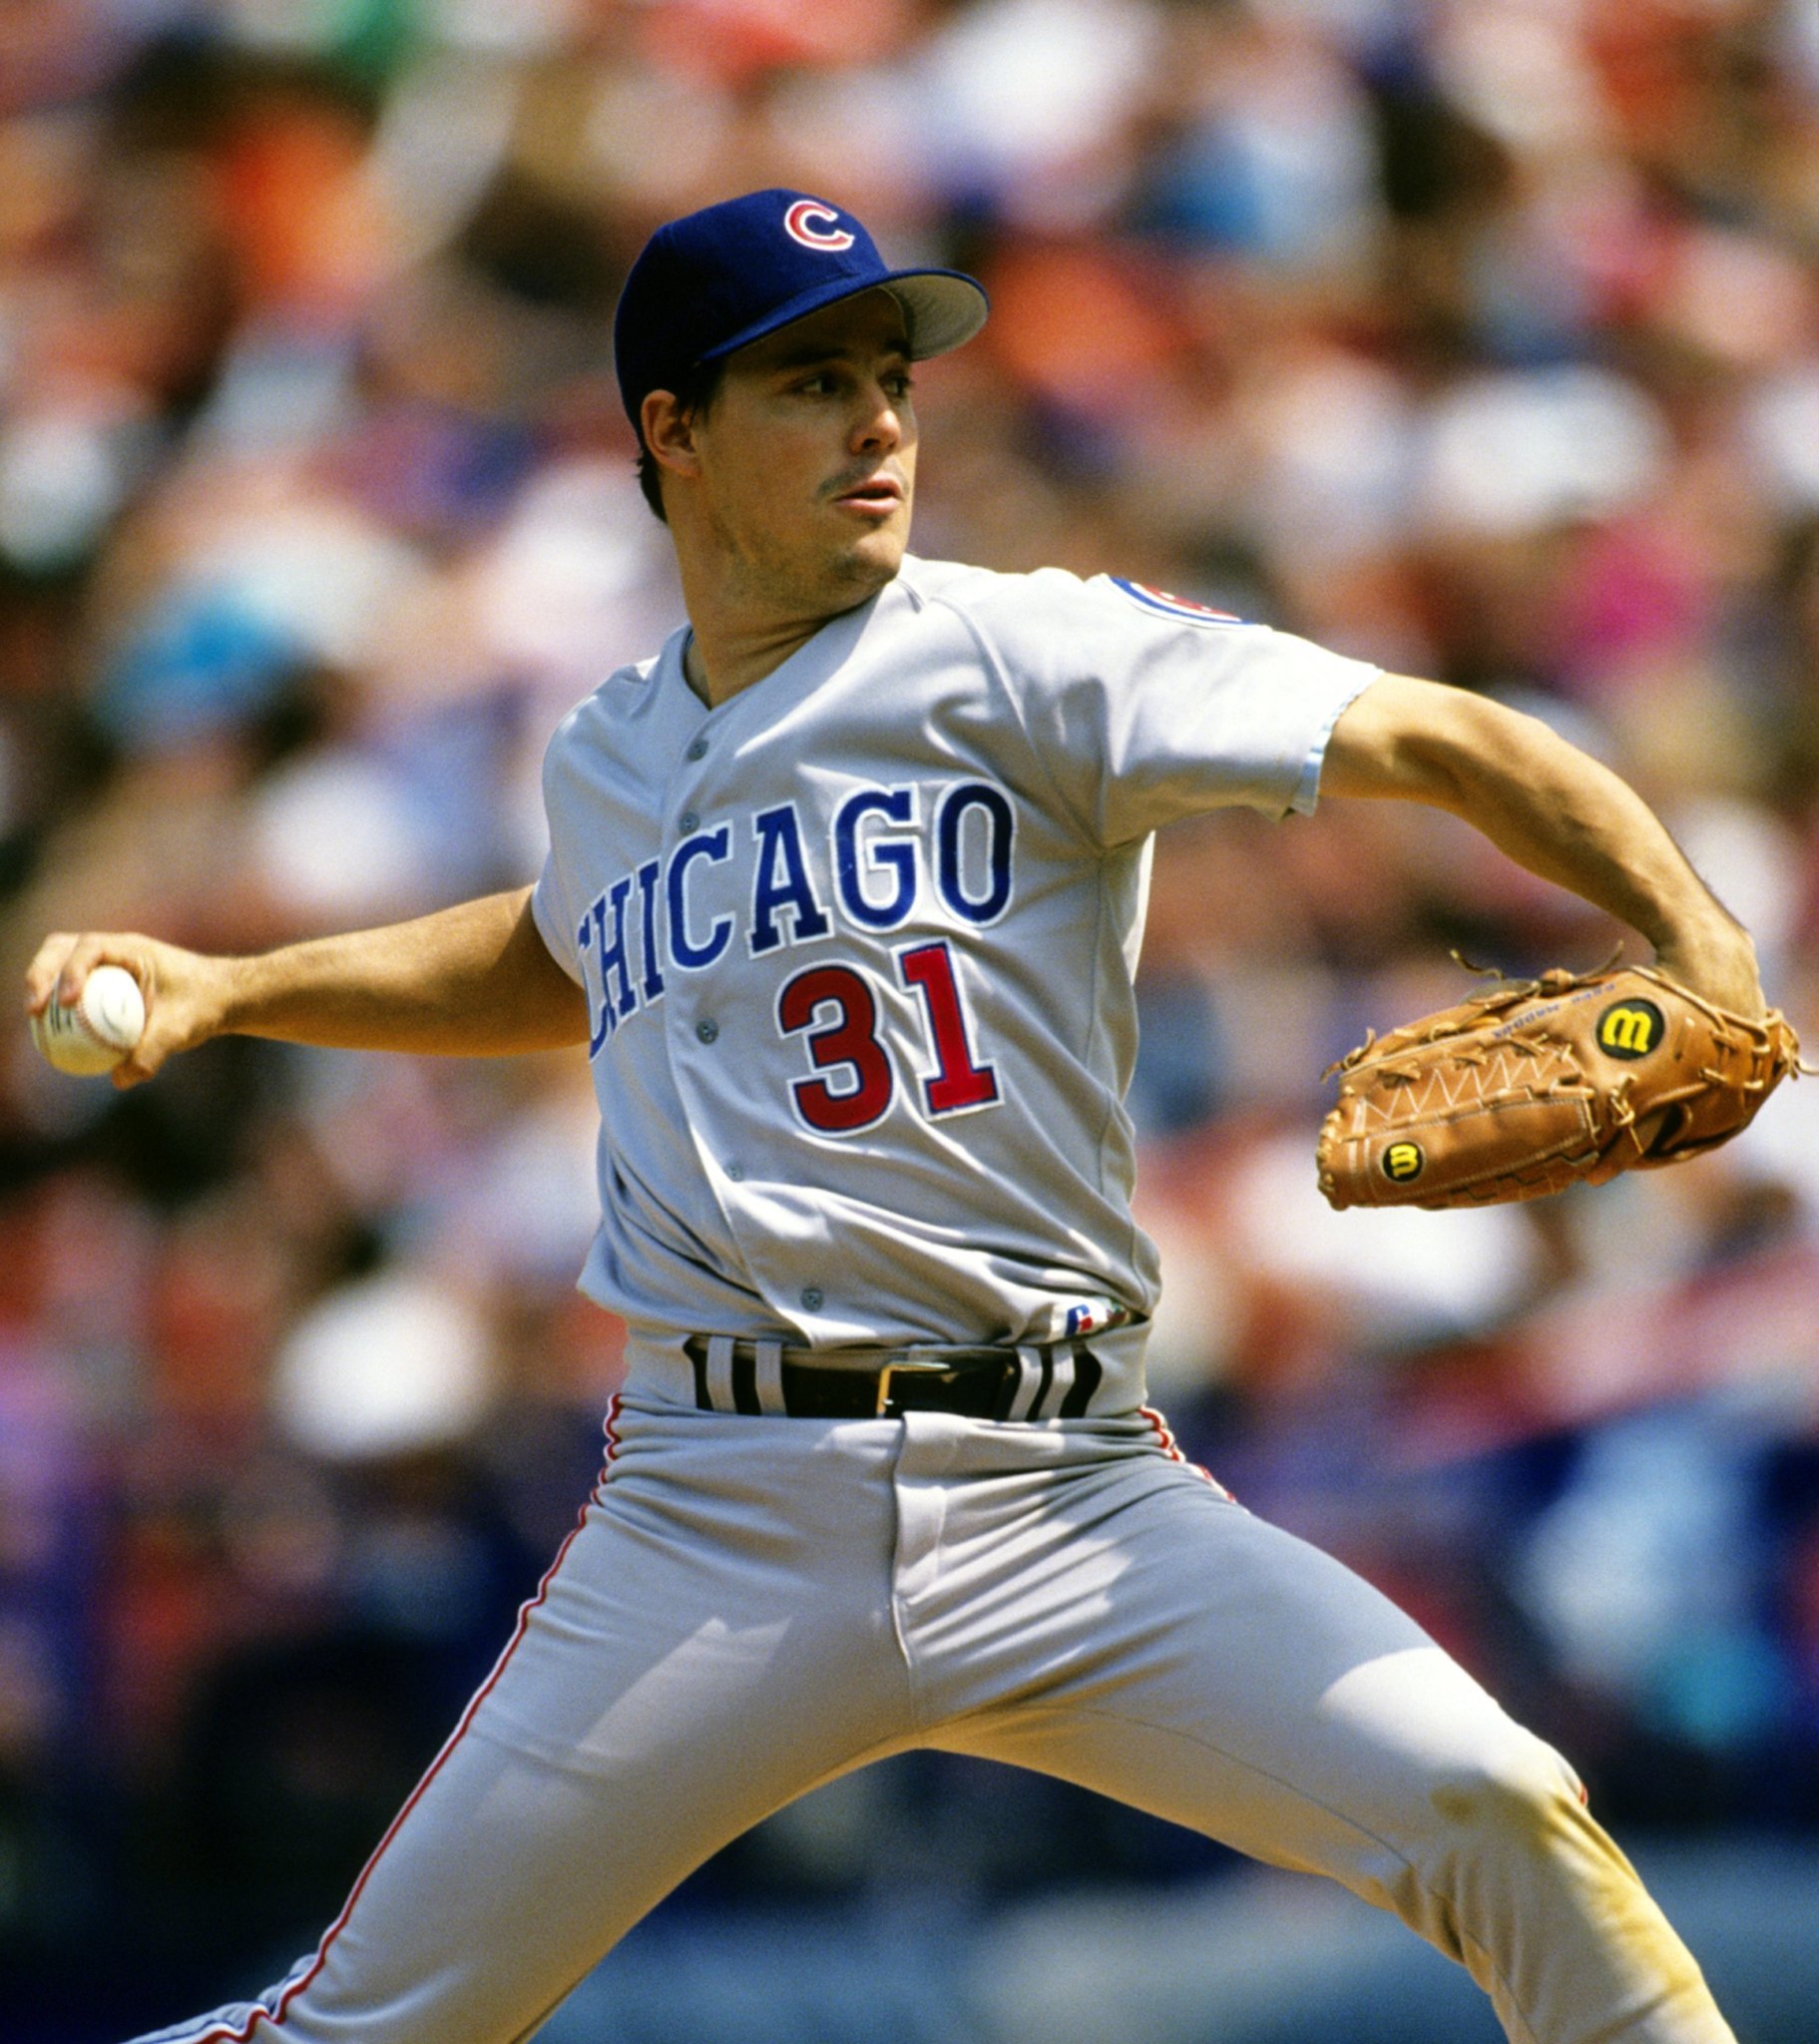 Greg Maddux talks about pitching, Braves, new role with Cubs 